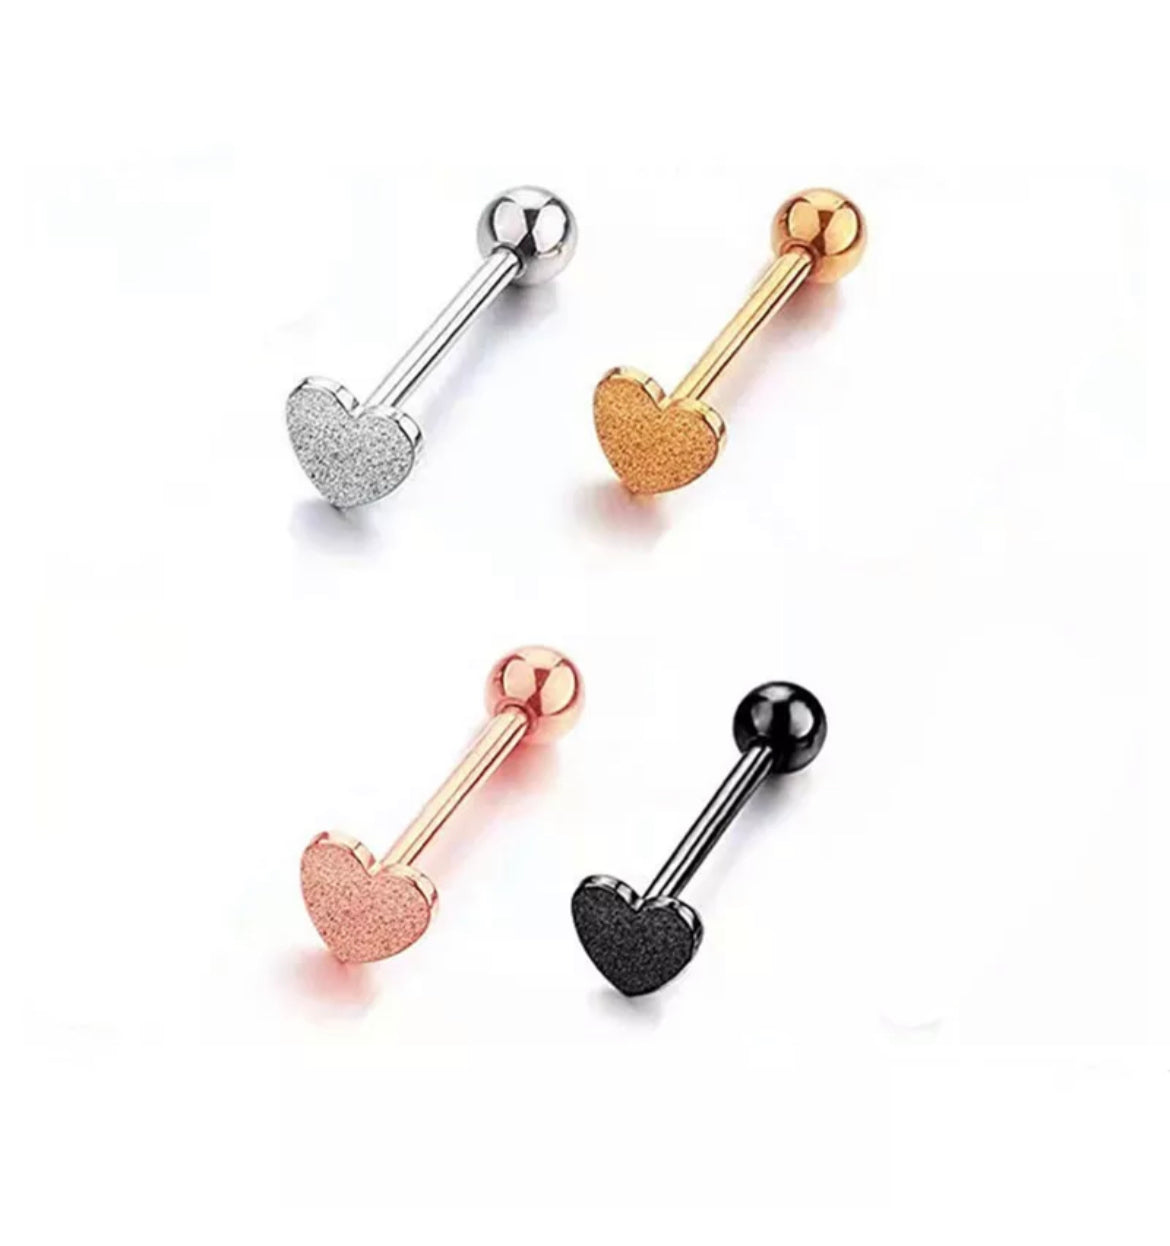 Surgical Steel Heart Tongue Bars